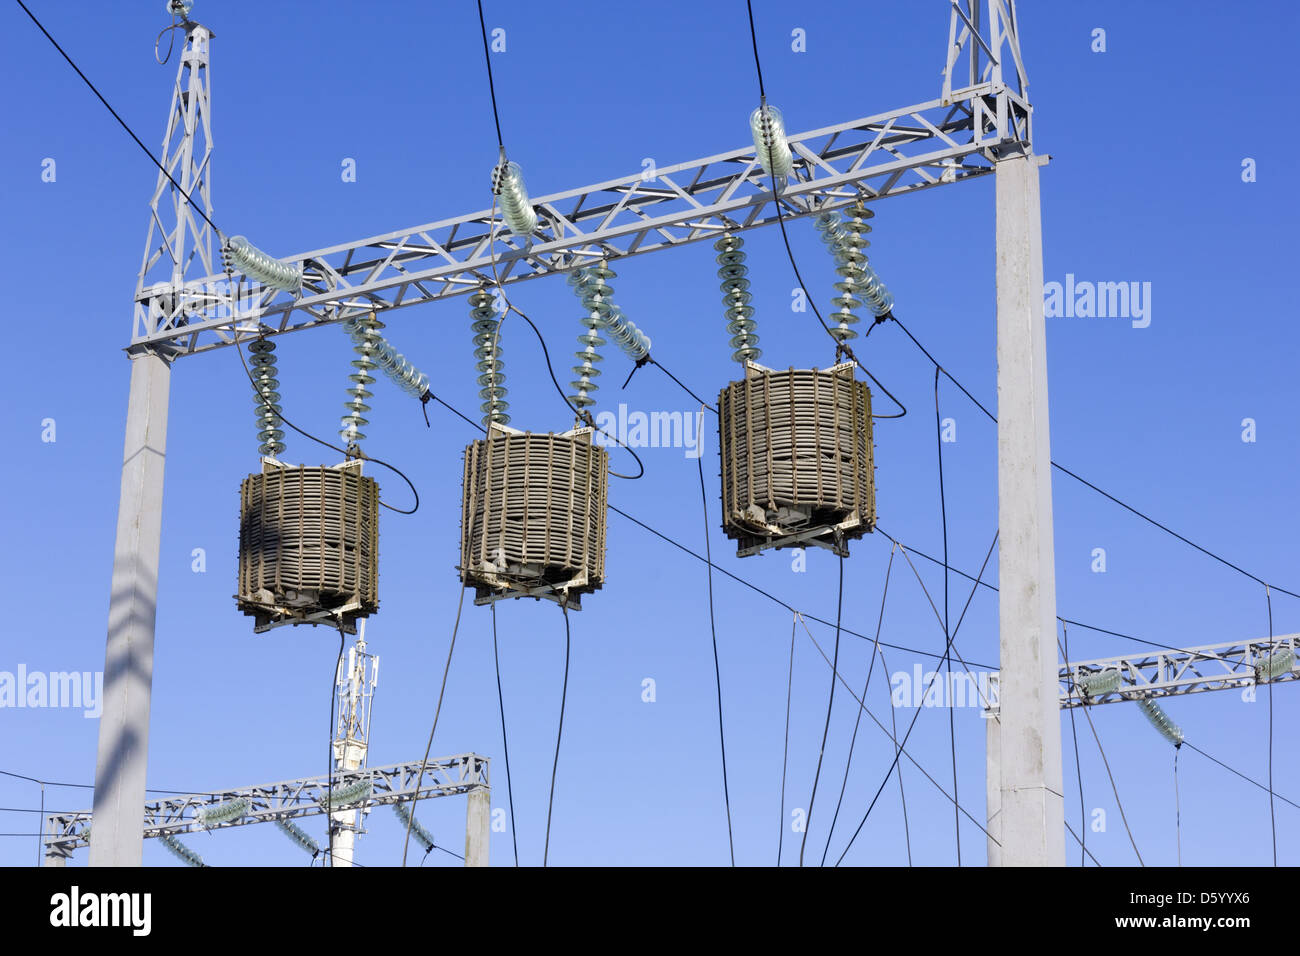 Transformers of high energy in  the sky Stock Photo